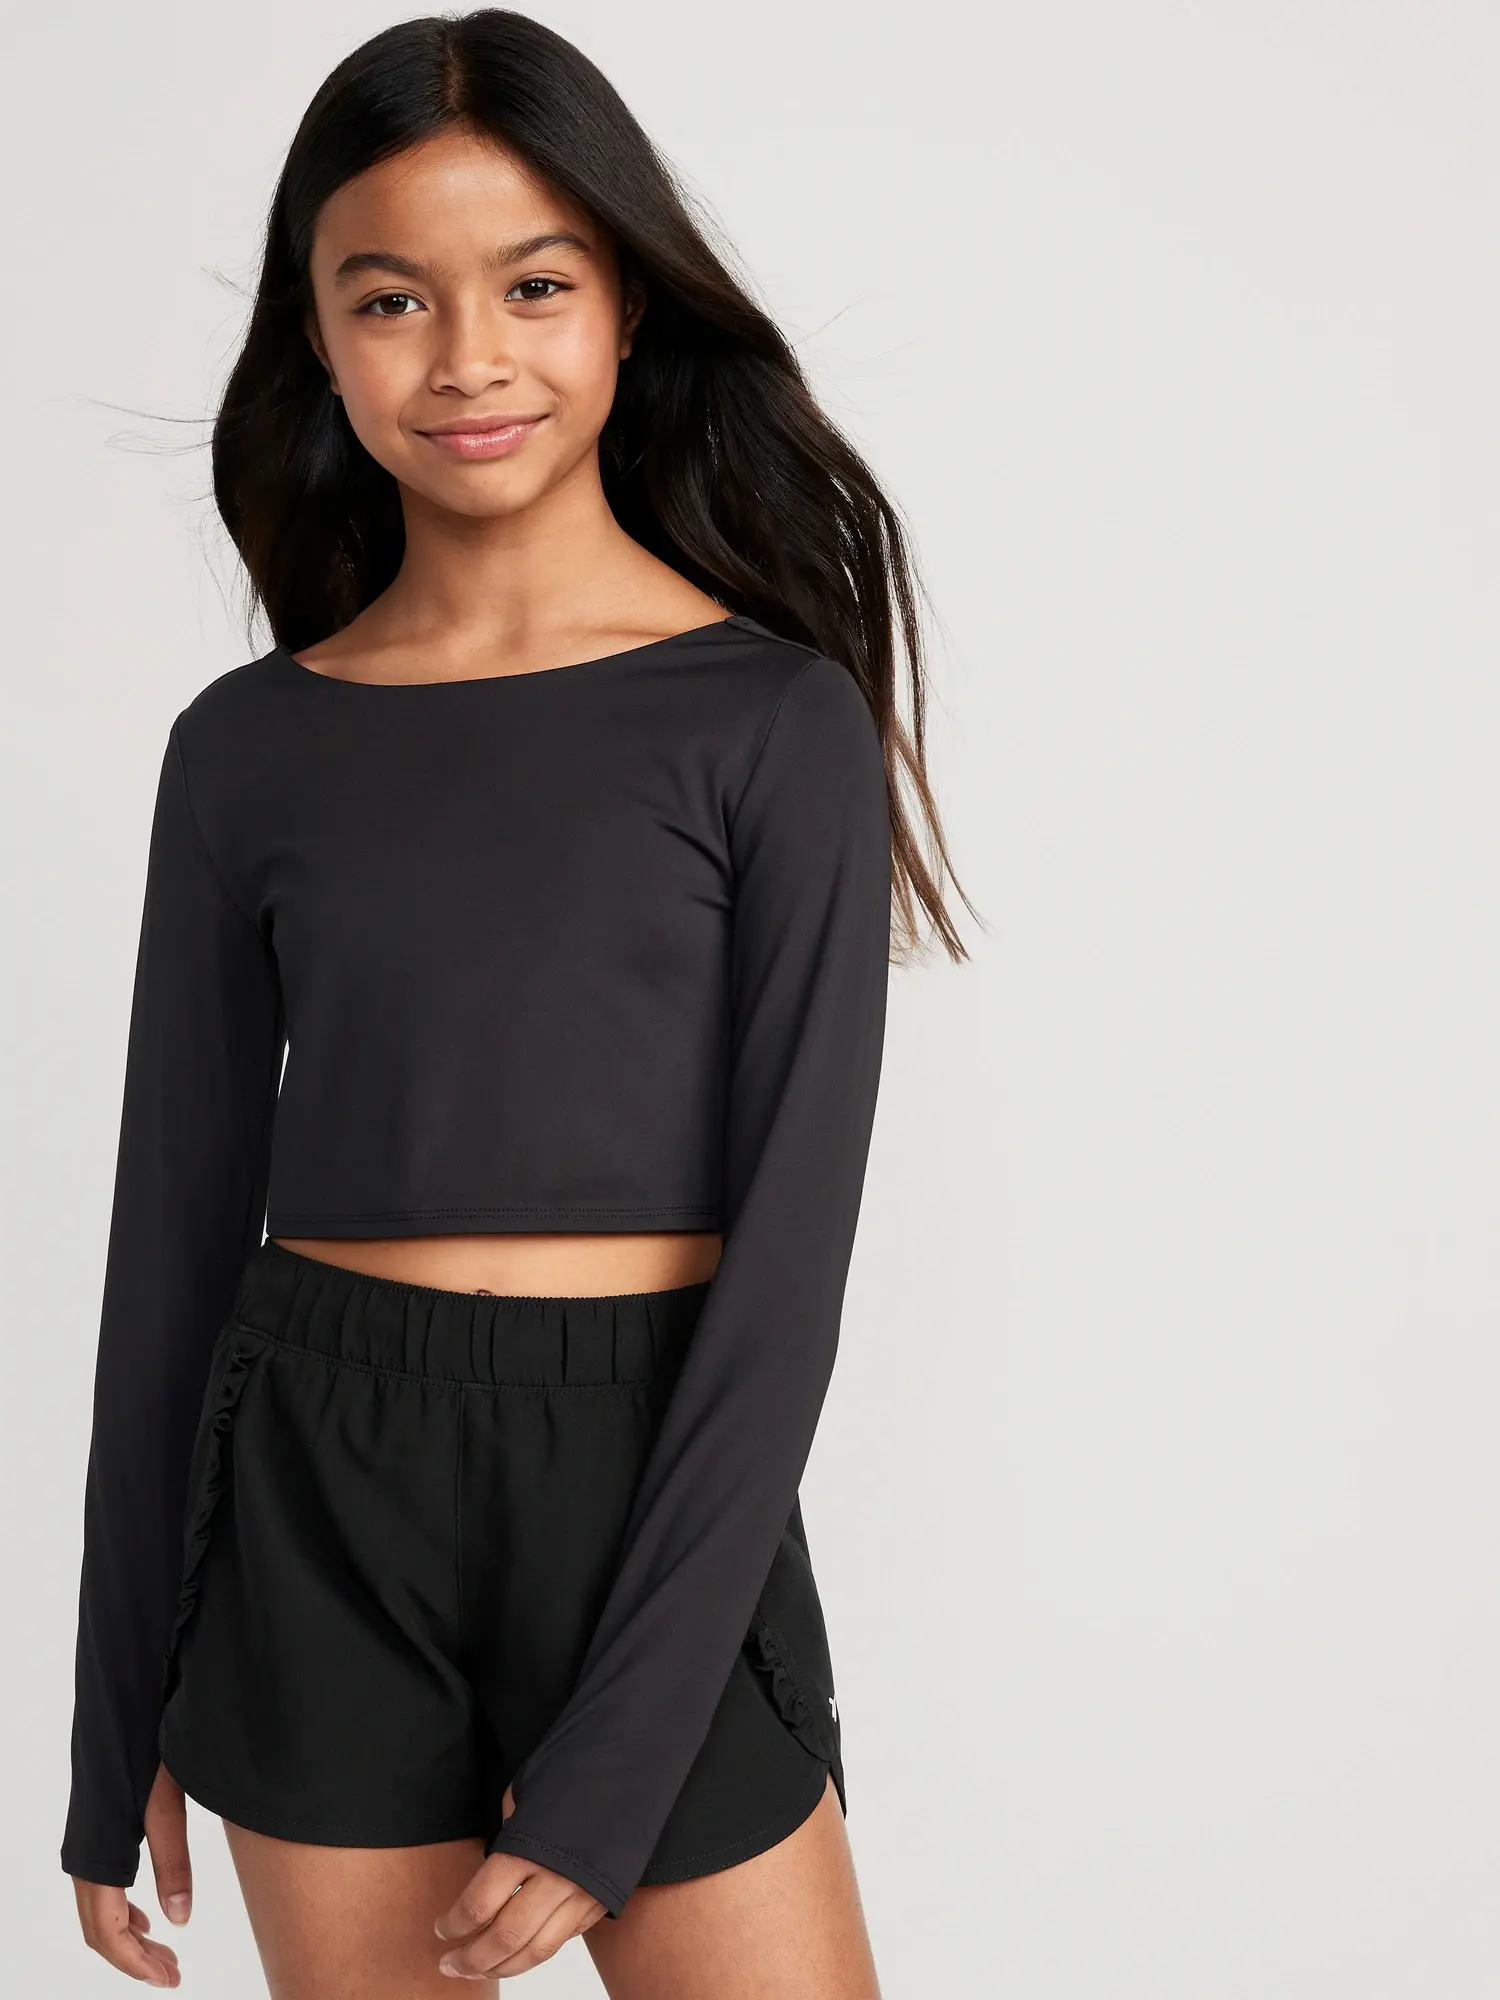 Old Navy PowerSoft Cropped Twist-Back Performance Top for Girls black. 1